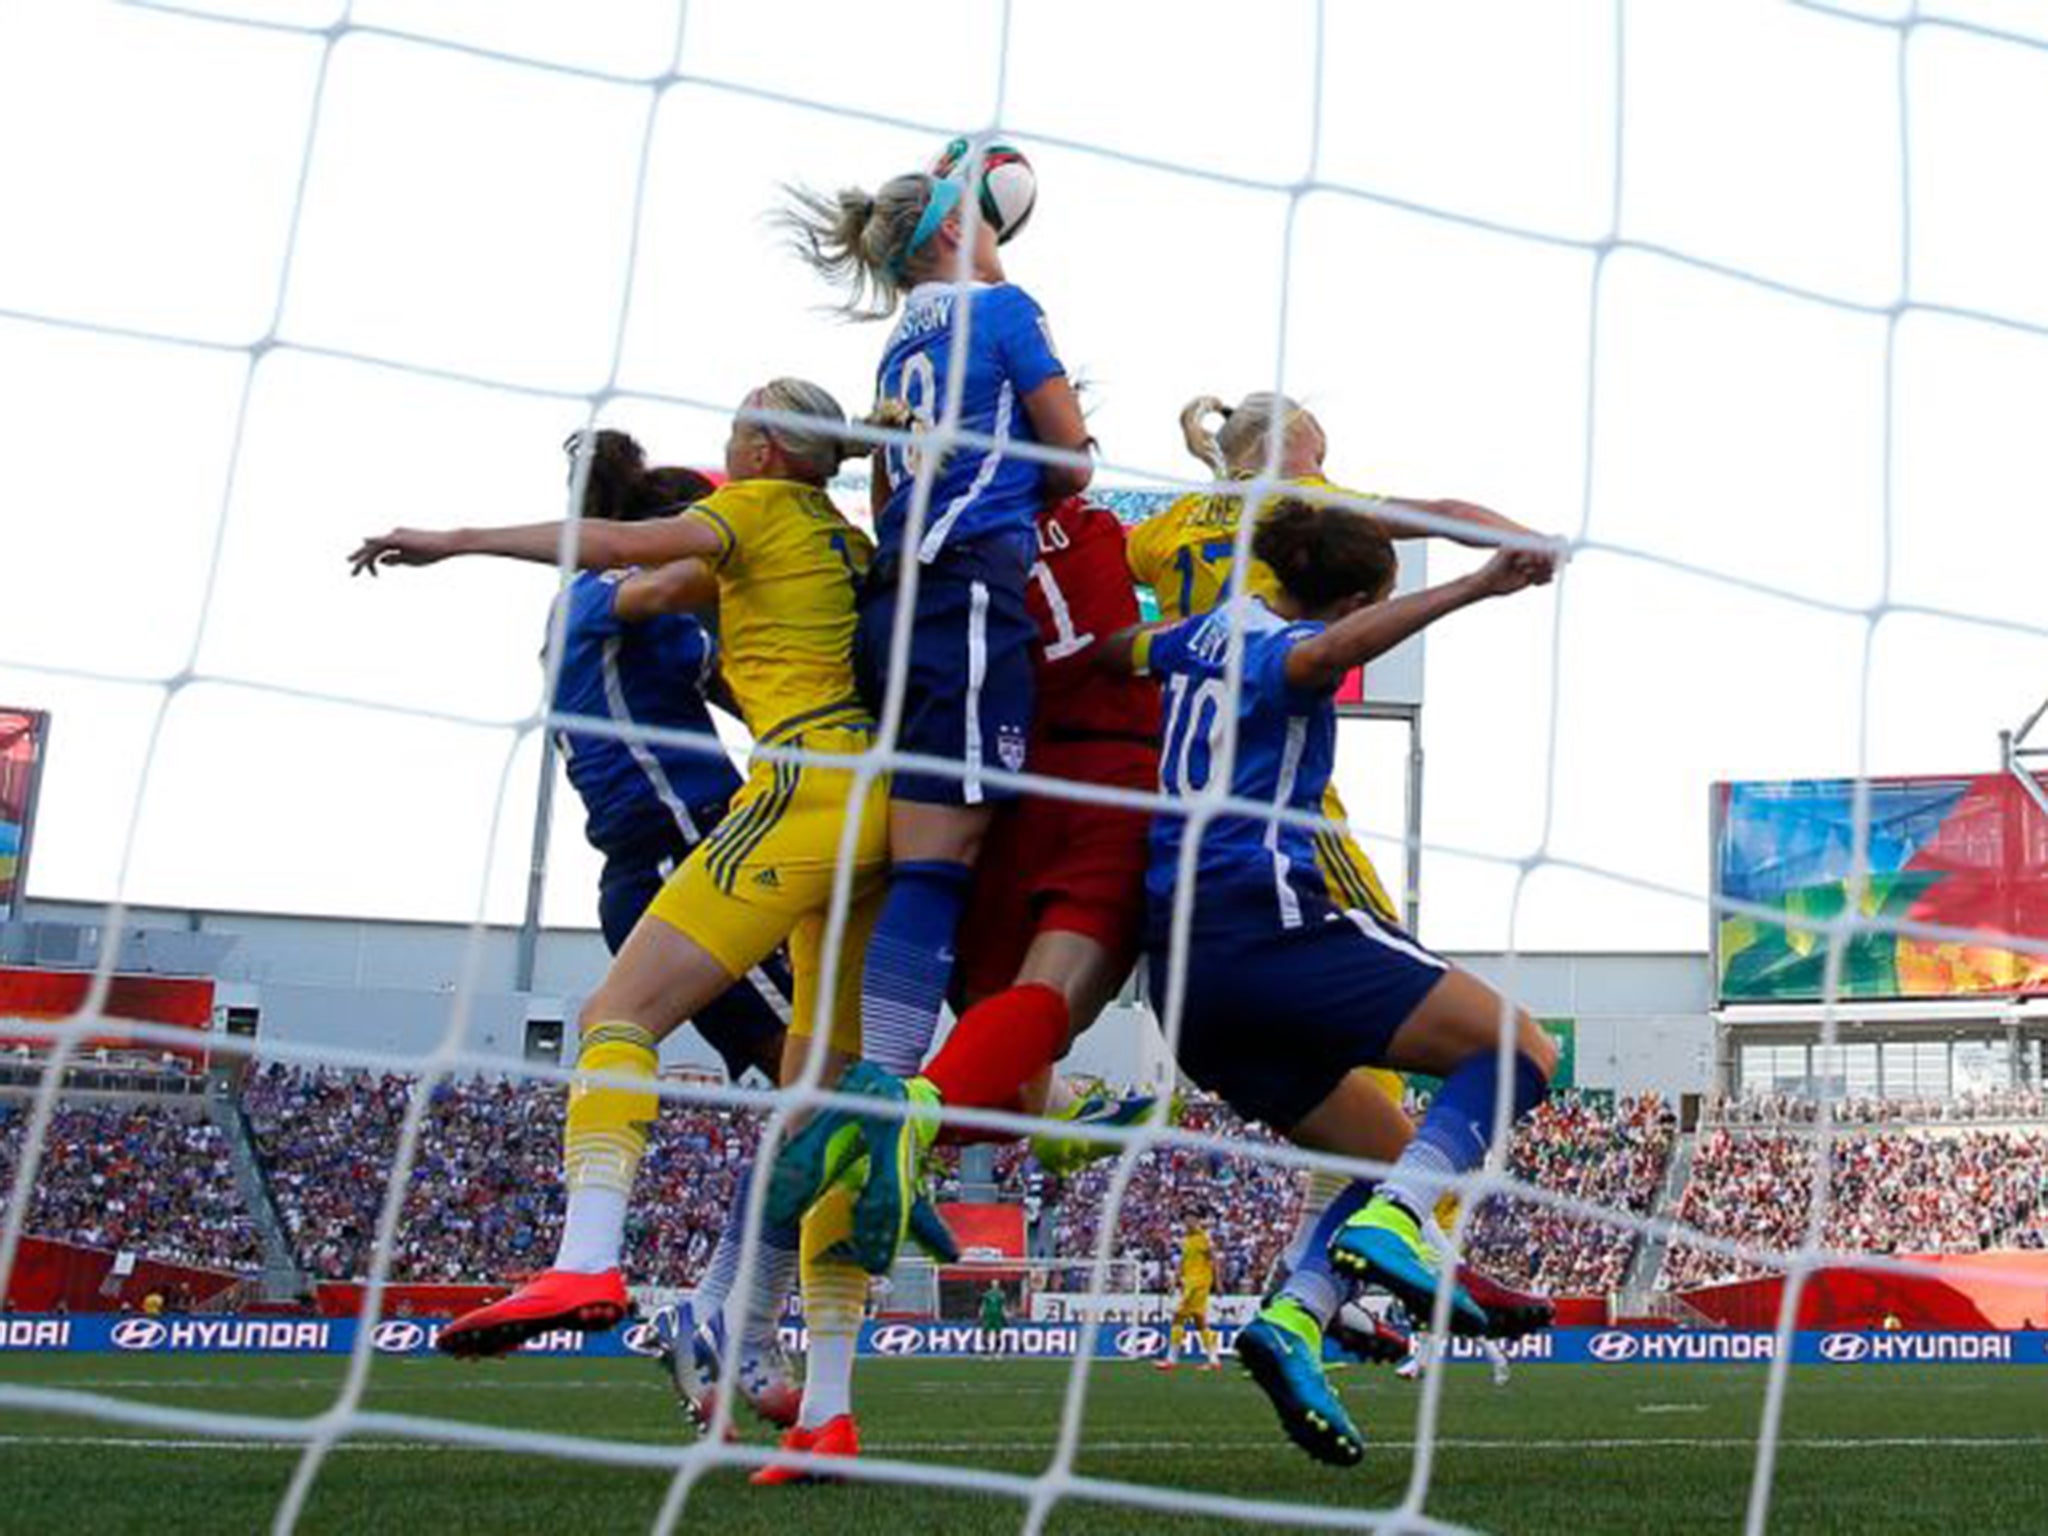 Staying on top: US Women’s keeper Hope Solo, in red, in the draw with Sweden on Friday